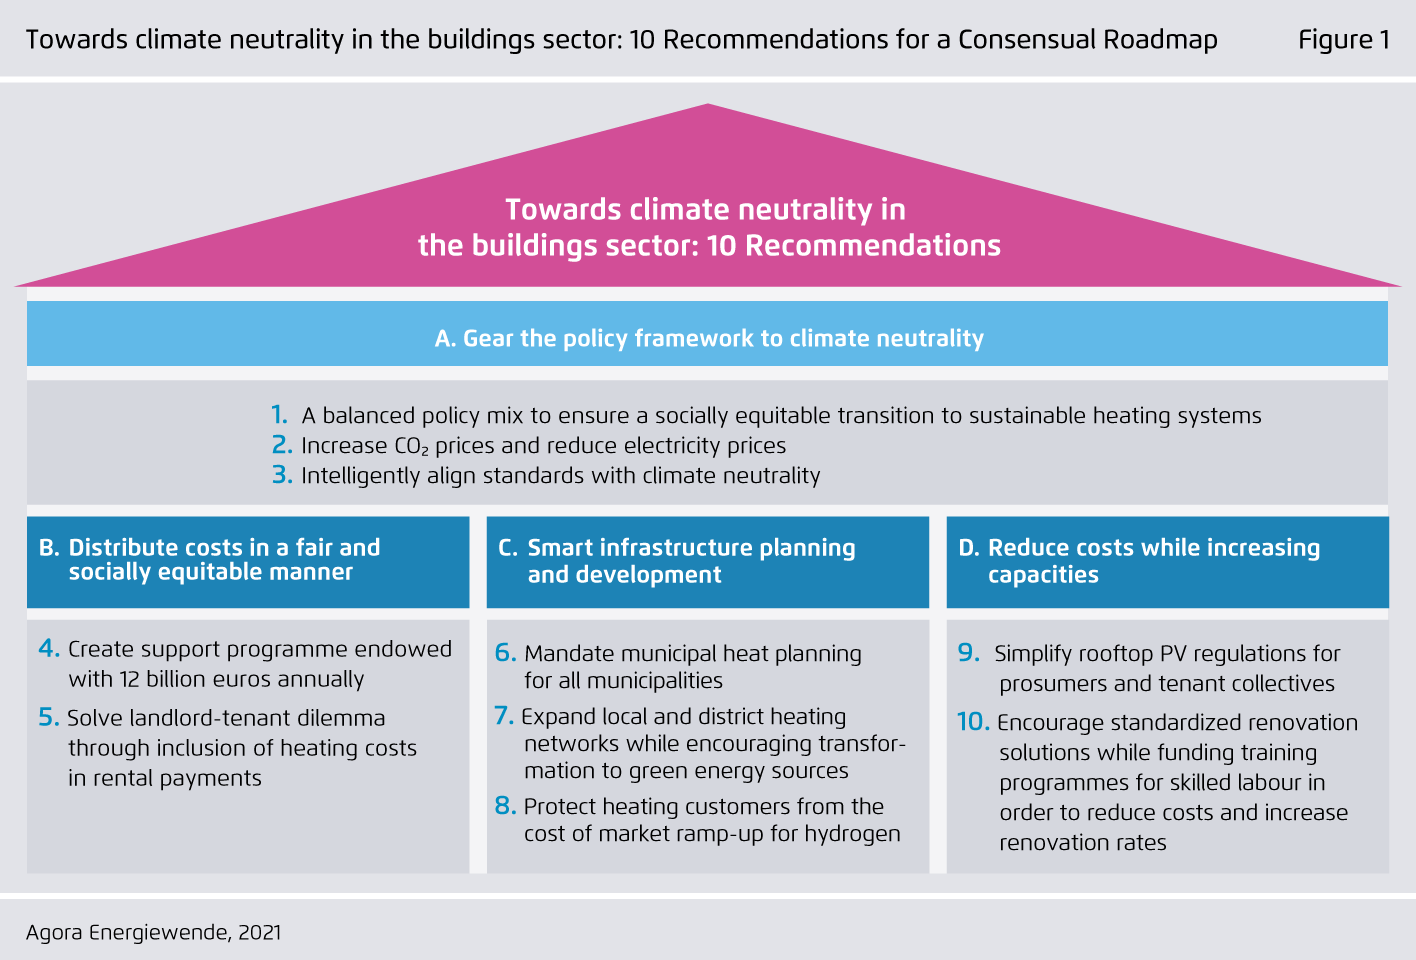 Preview for Towards climate neutrality in the buildings sector: 10 Recommendations for a Consensual Roadmap